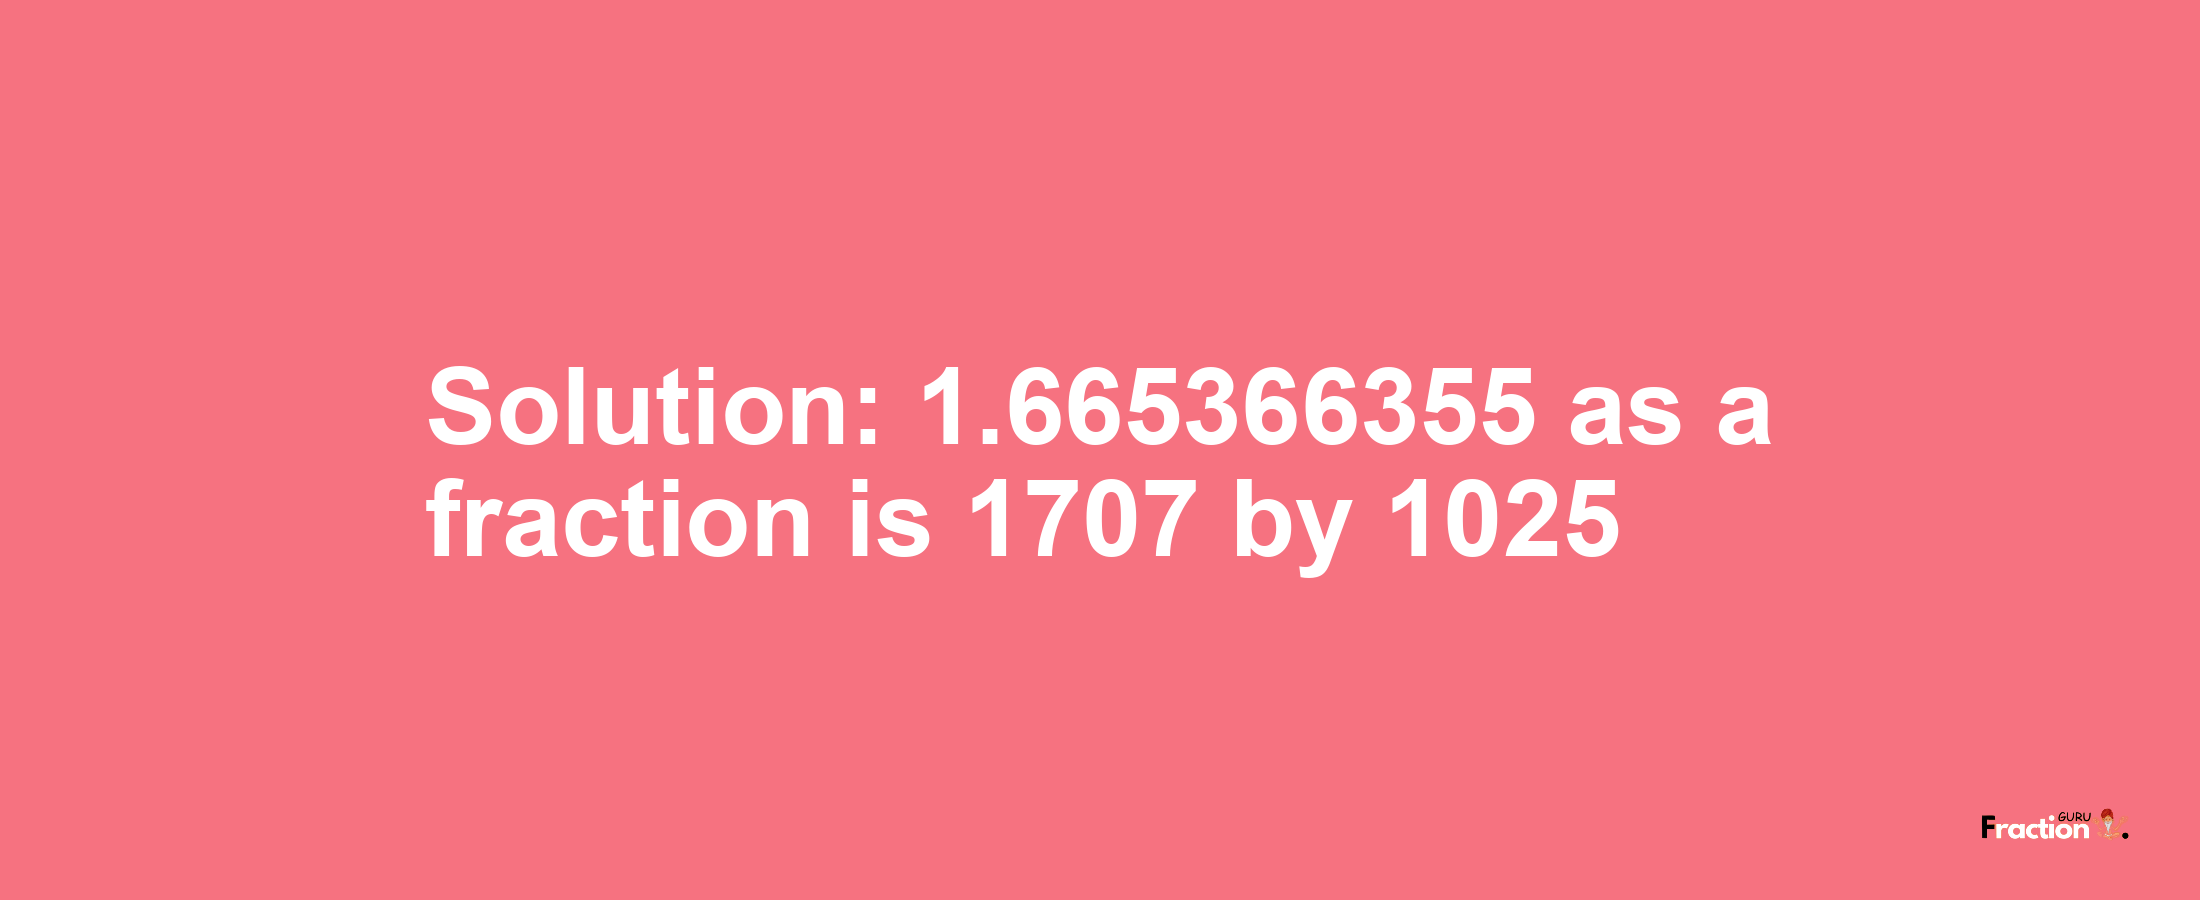 Solution:1.665366355 as a fraction is 1707/1025